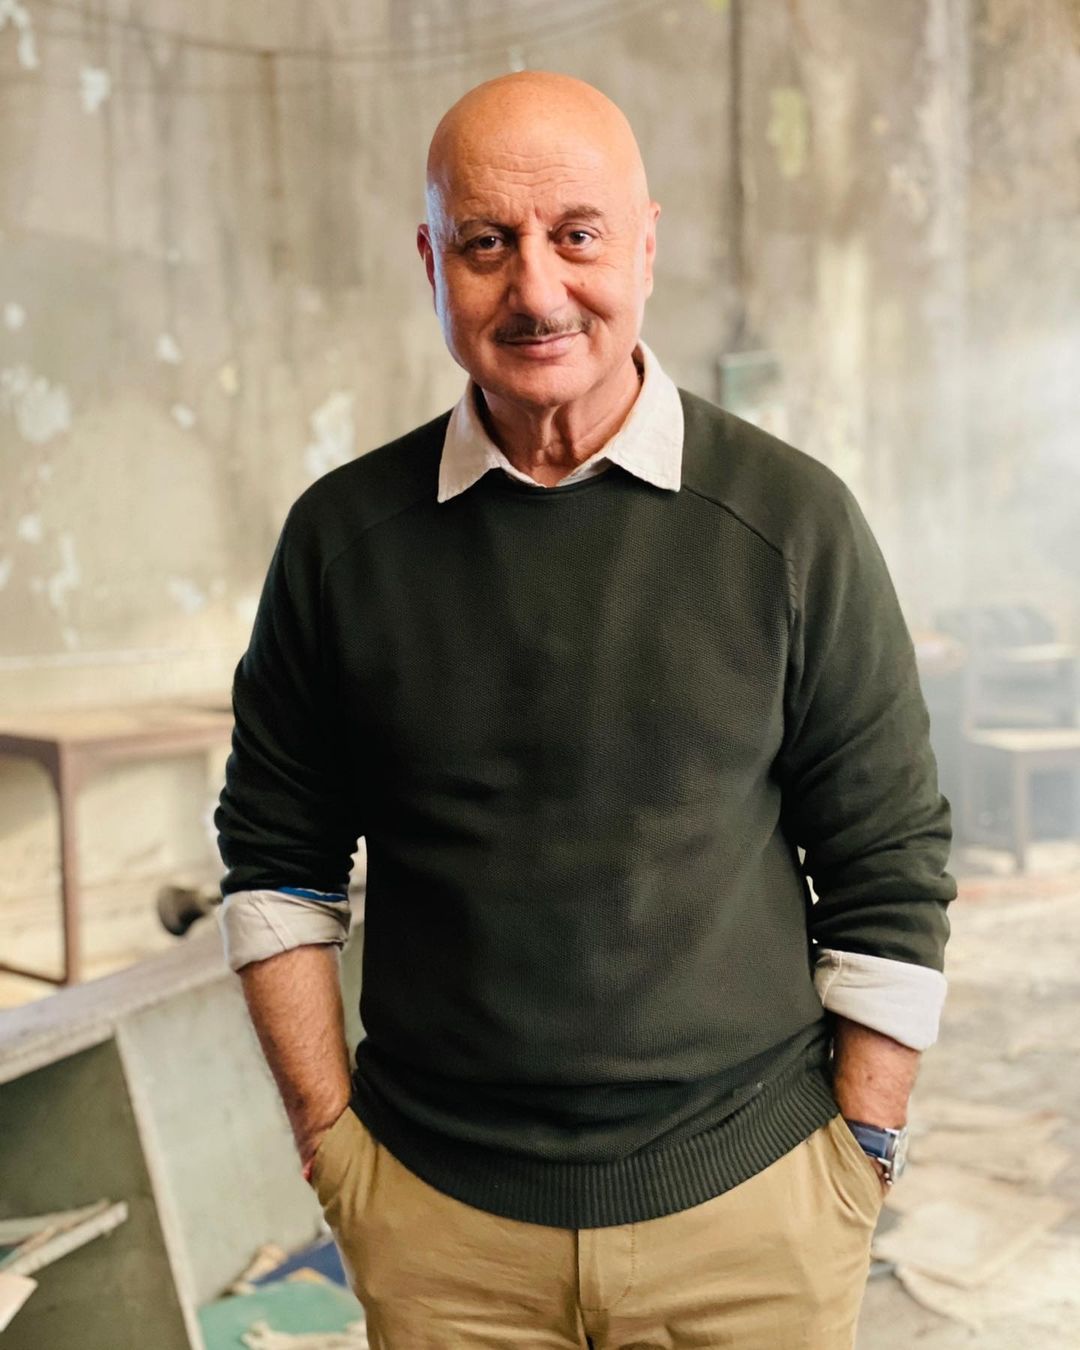 Anupam Kher was once rejected for a job as a radio announcer, was told, 'I touch your feet, please don't come to AIR Shimla again'